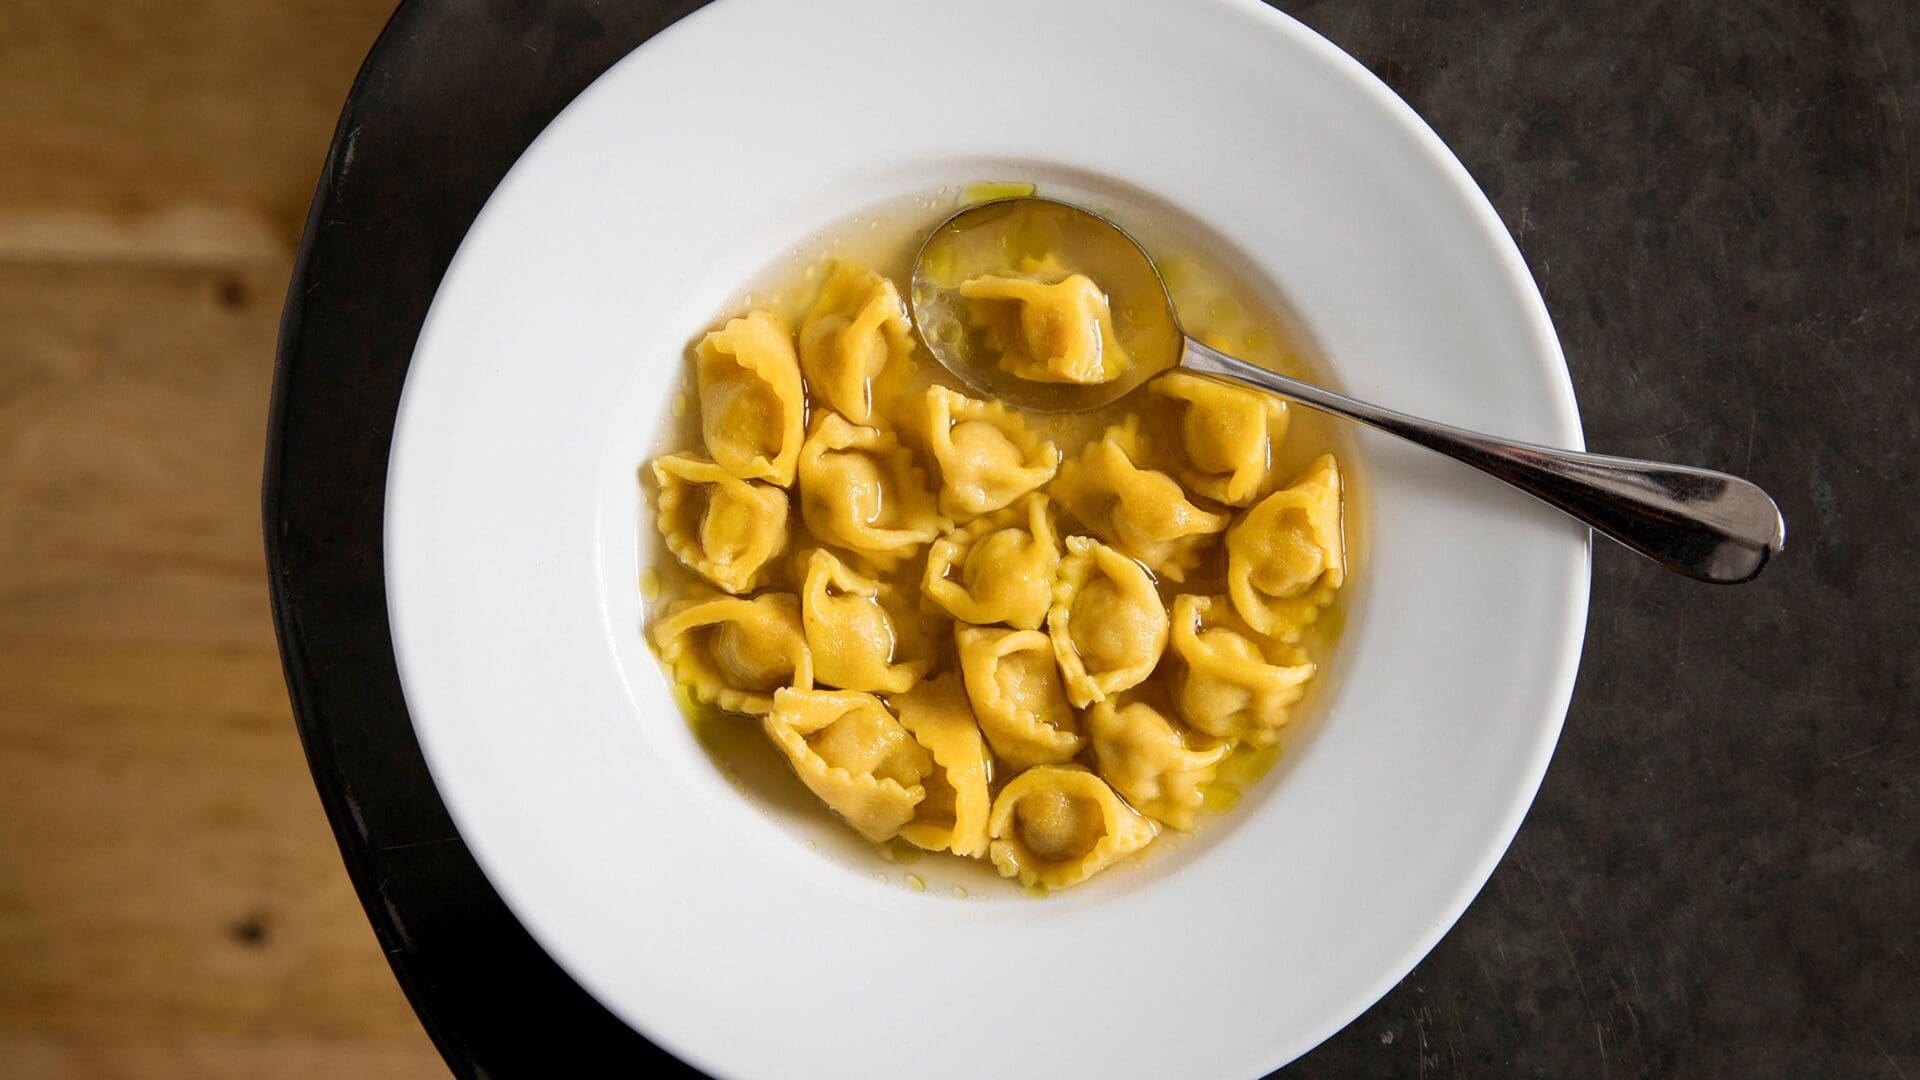 The best restaurants in Hackney | A plate of tortellini in broth, on a wooden table, at Brawn